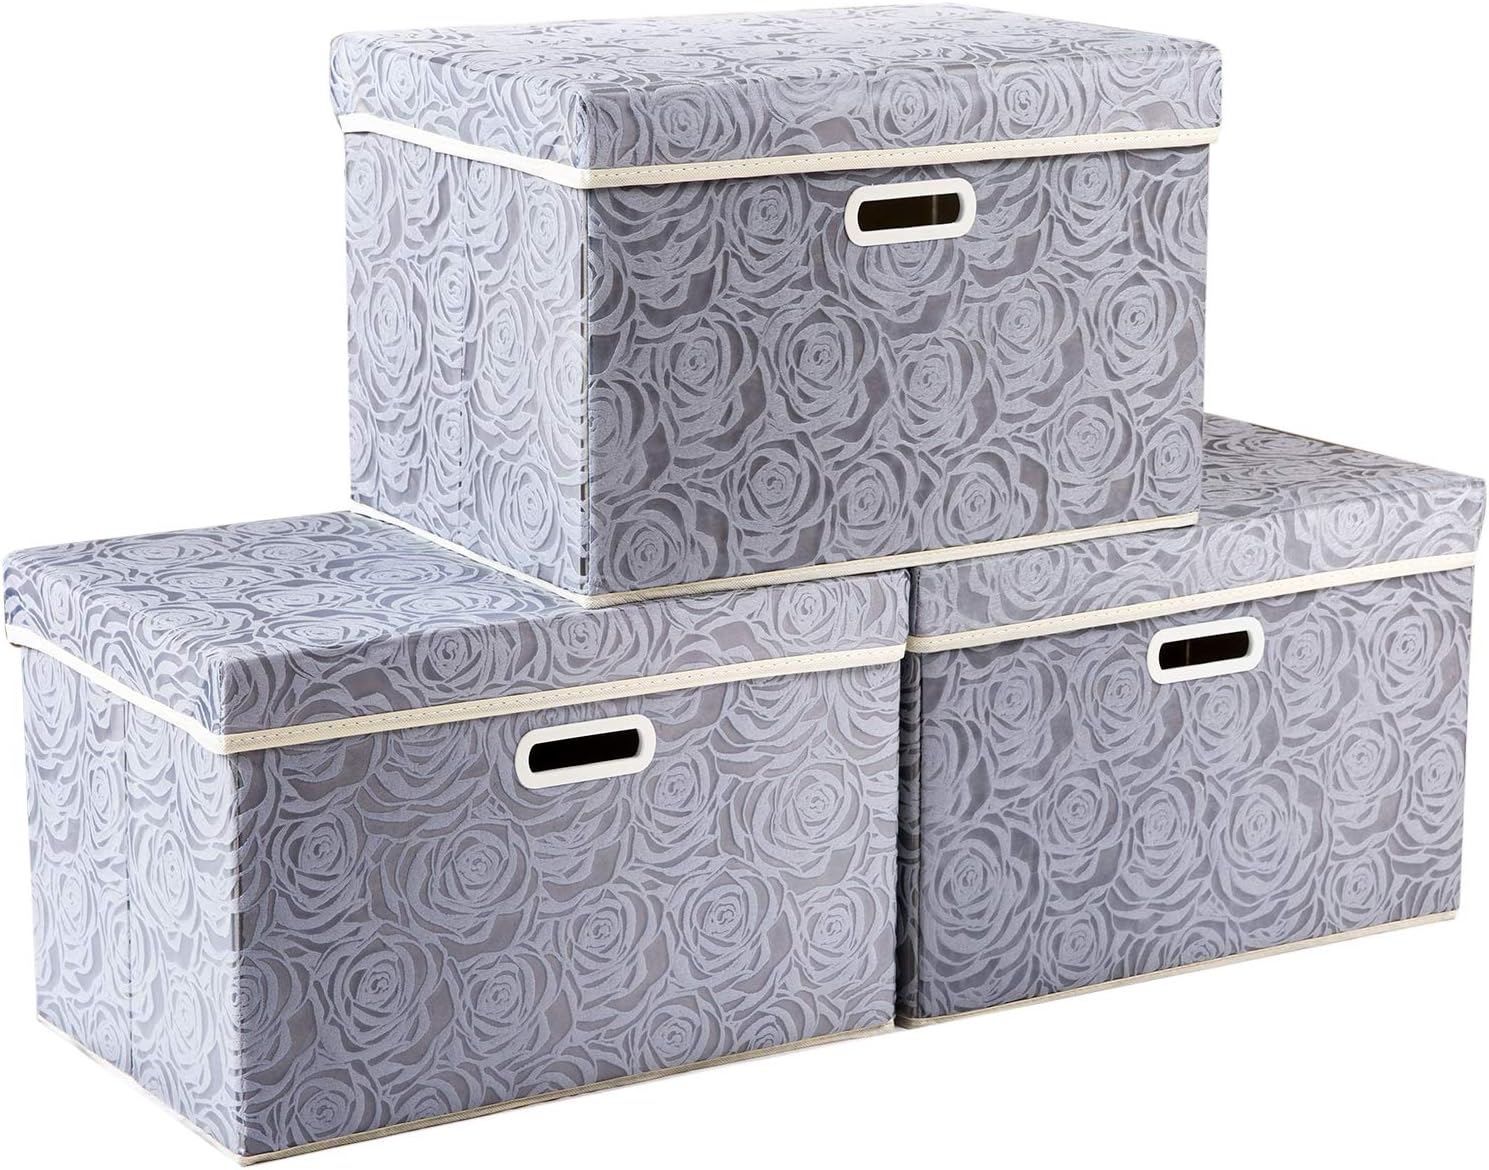 PRANDOM Larger Collapsible Storage Boxes with Lids Fabric Decorative Storage Bins Cubes Organizer Containers Baskets with Cover Handles for Bedroom Living Room Gray 17.7x11.8x11.8 Inch 3 Pack